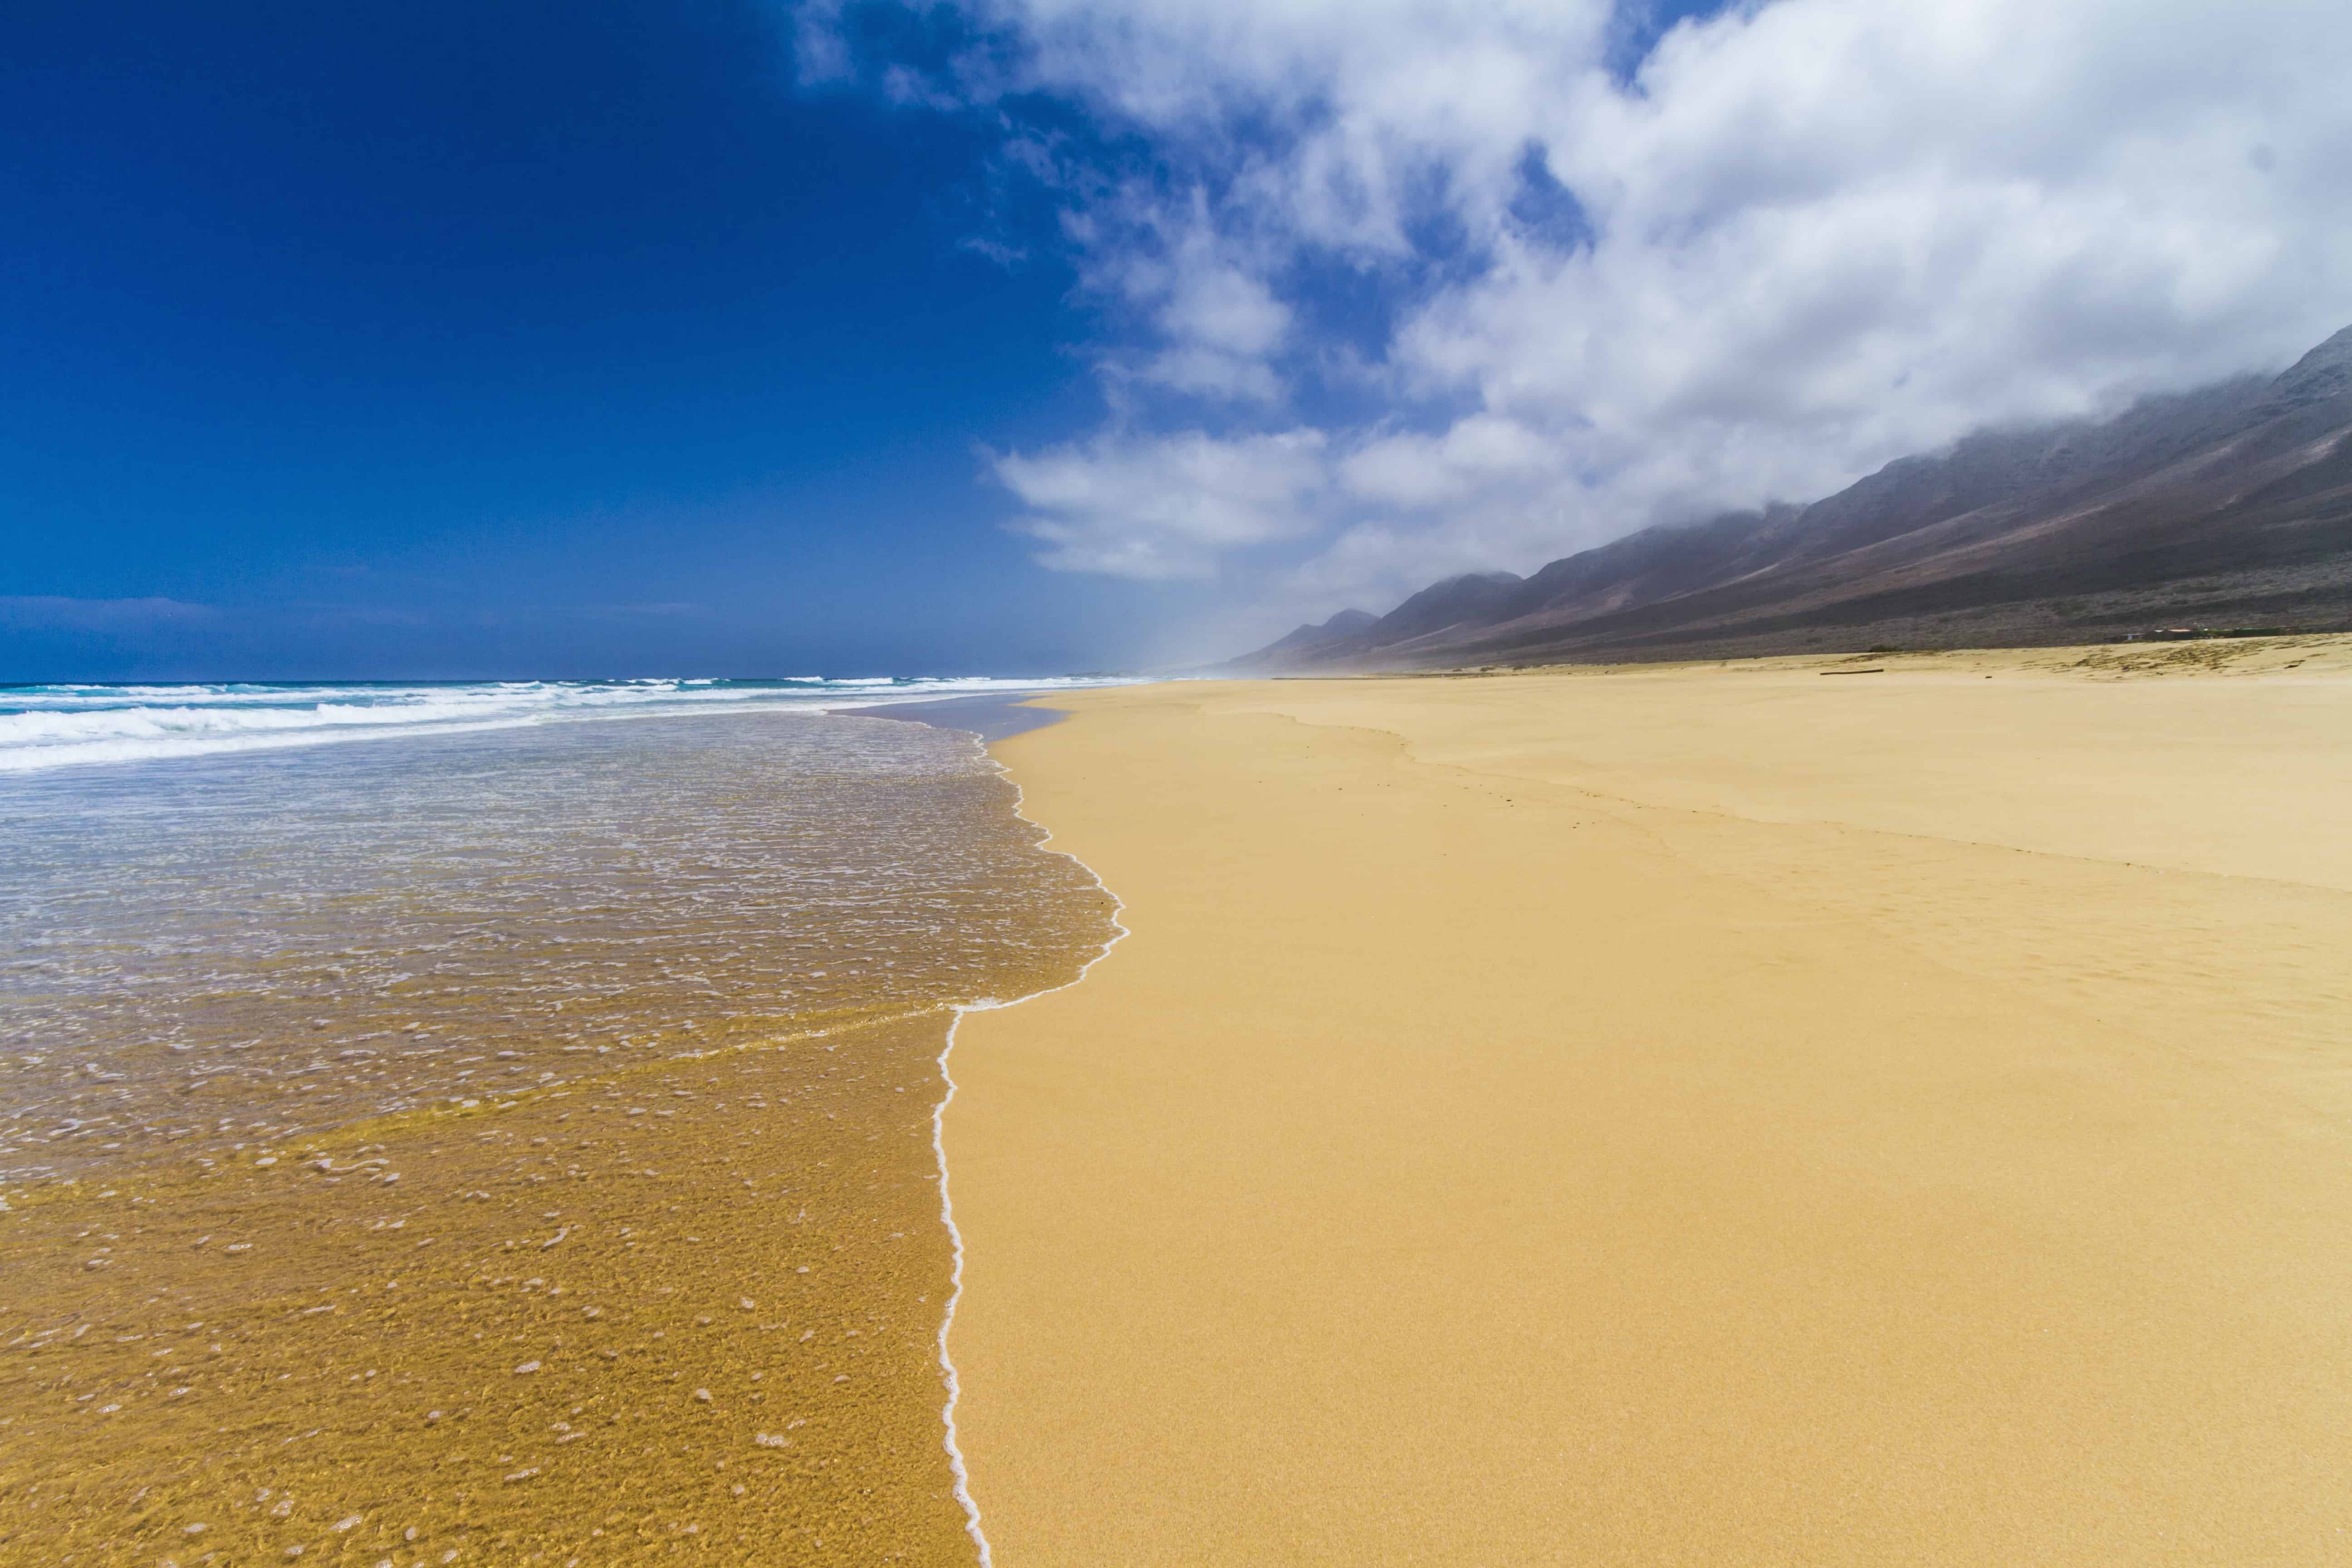 The Canary Islands best beaches